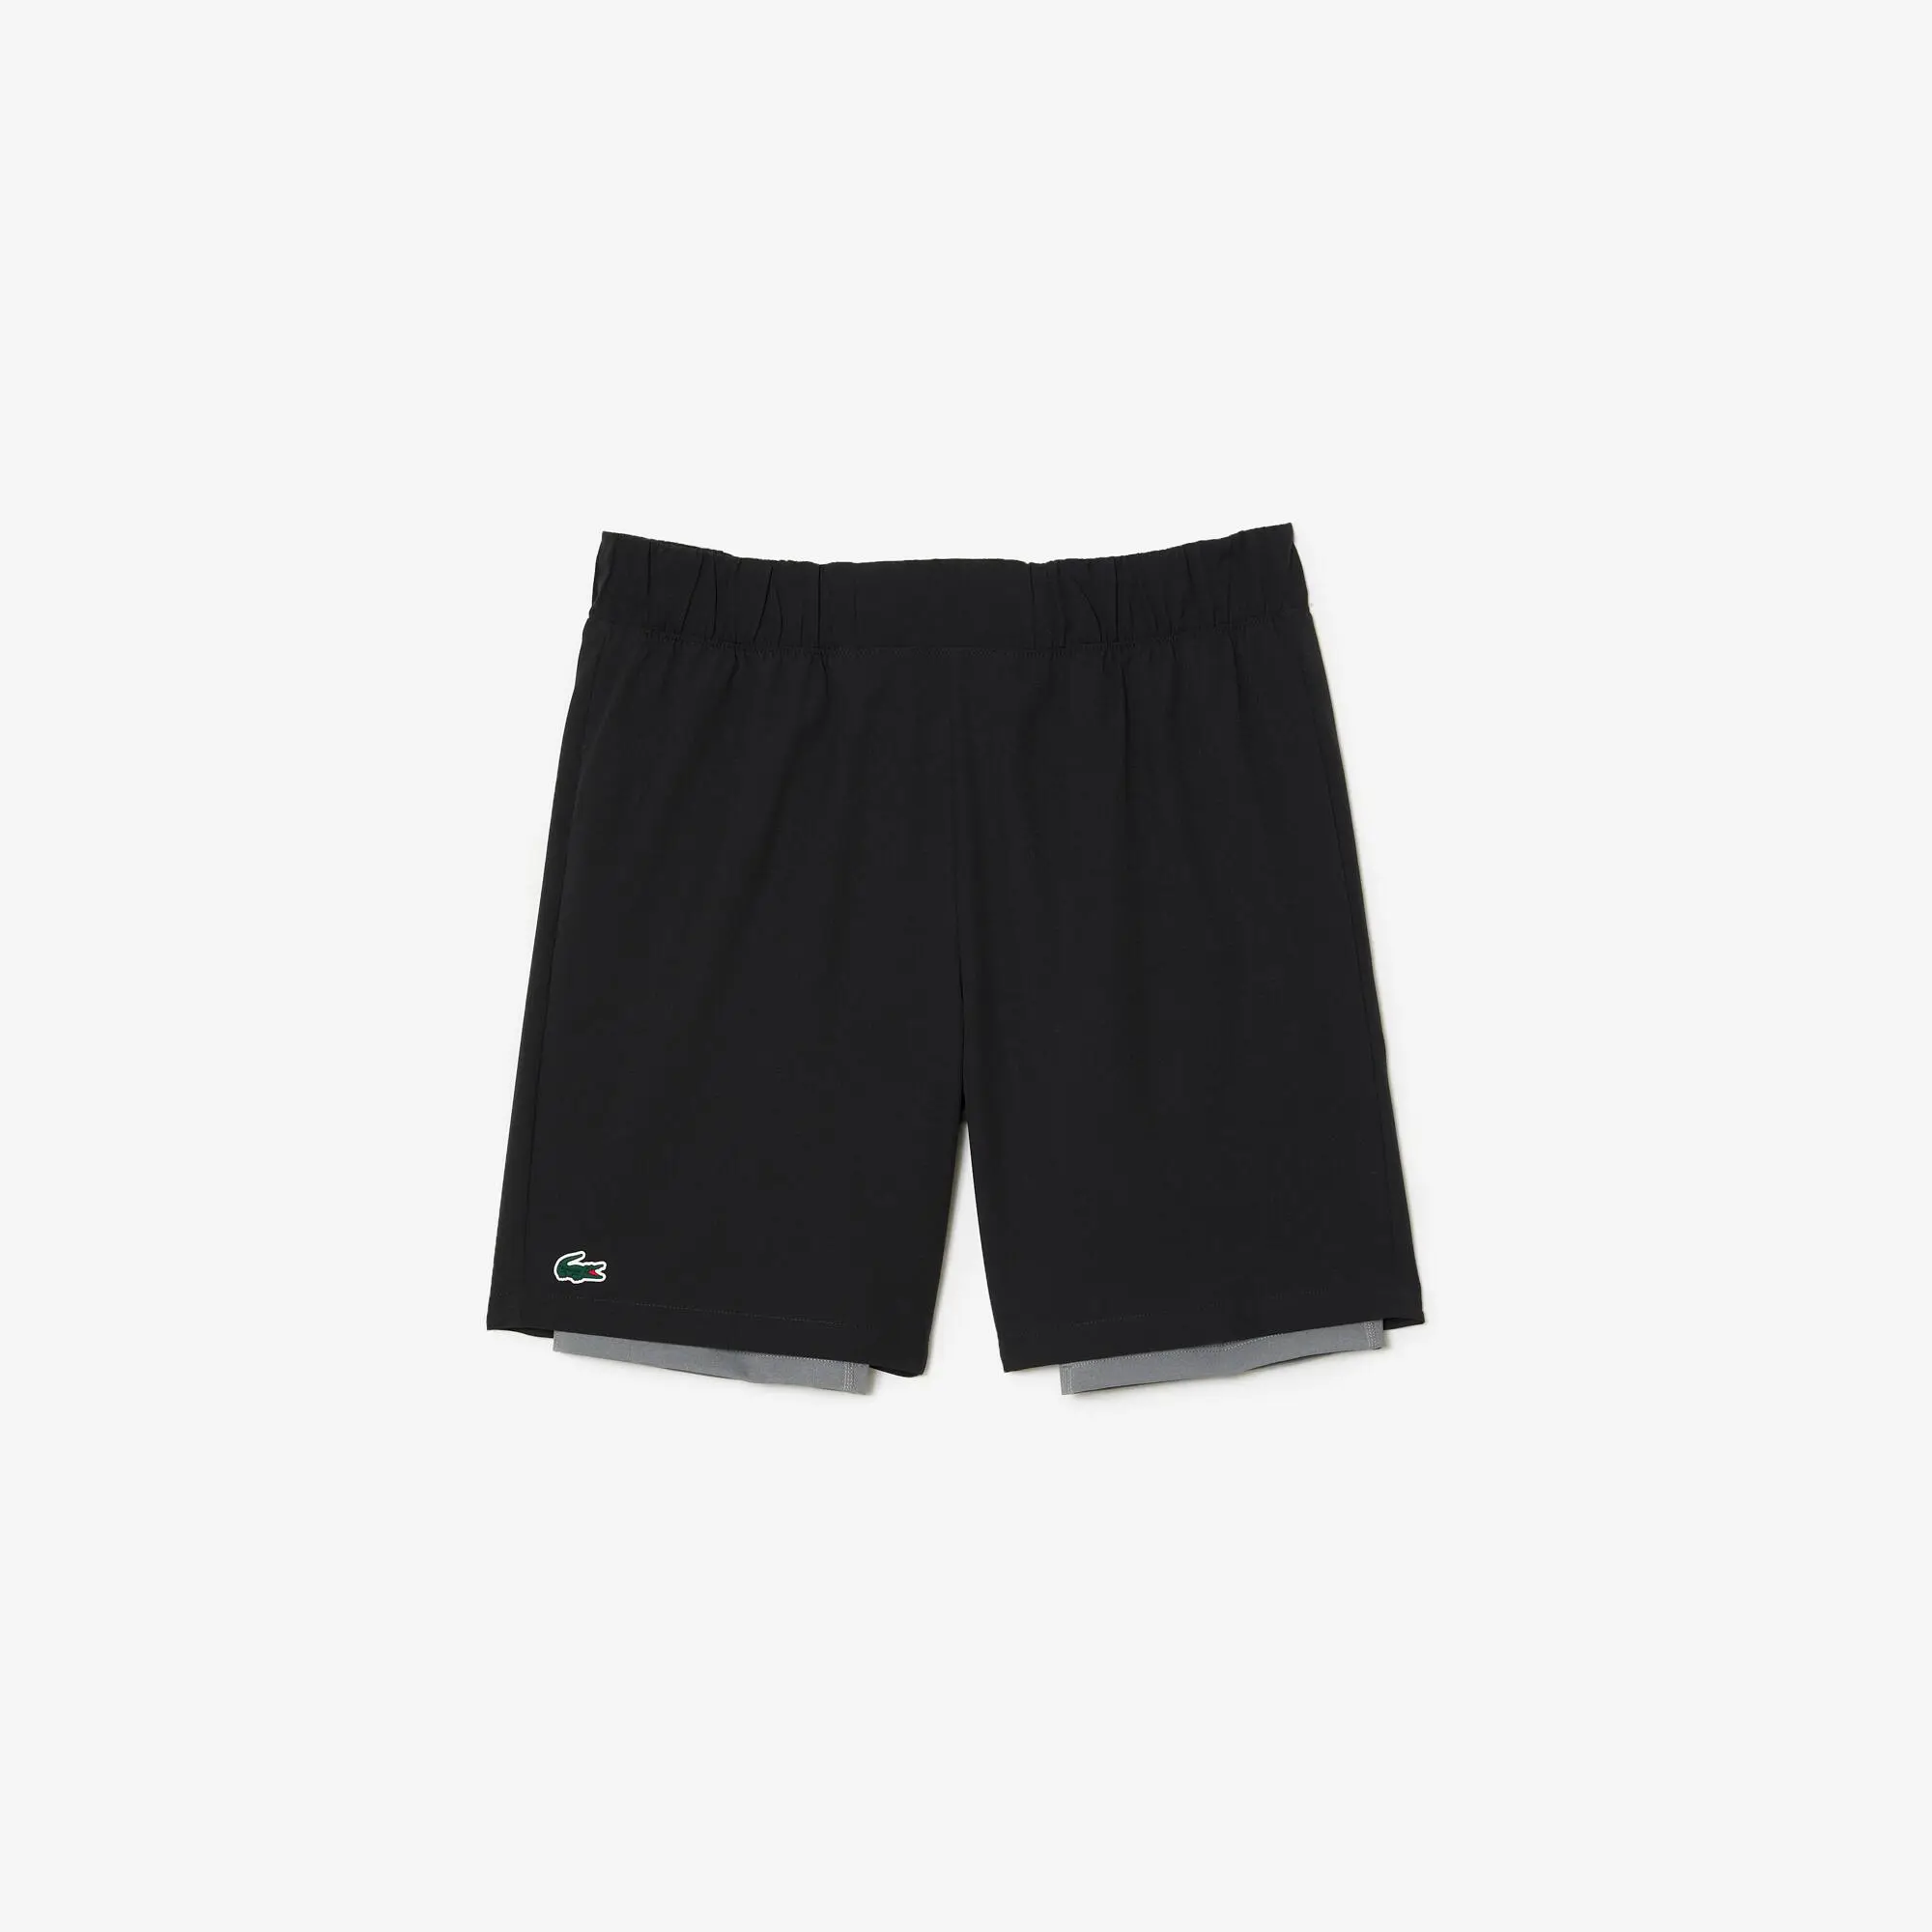 Lacoste Men’s Two-Tone Lacoste Sport Shorts with Built-in Undershorts. 2